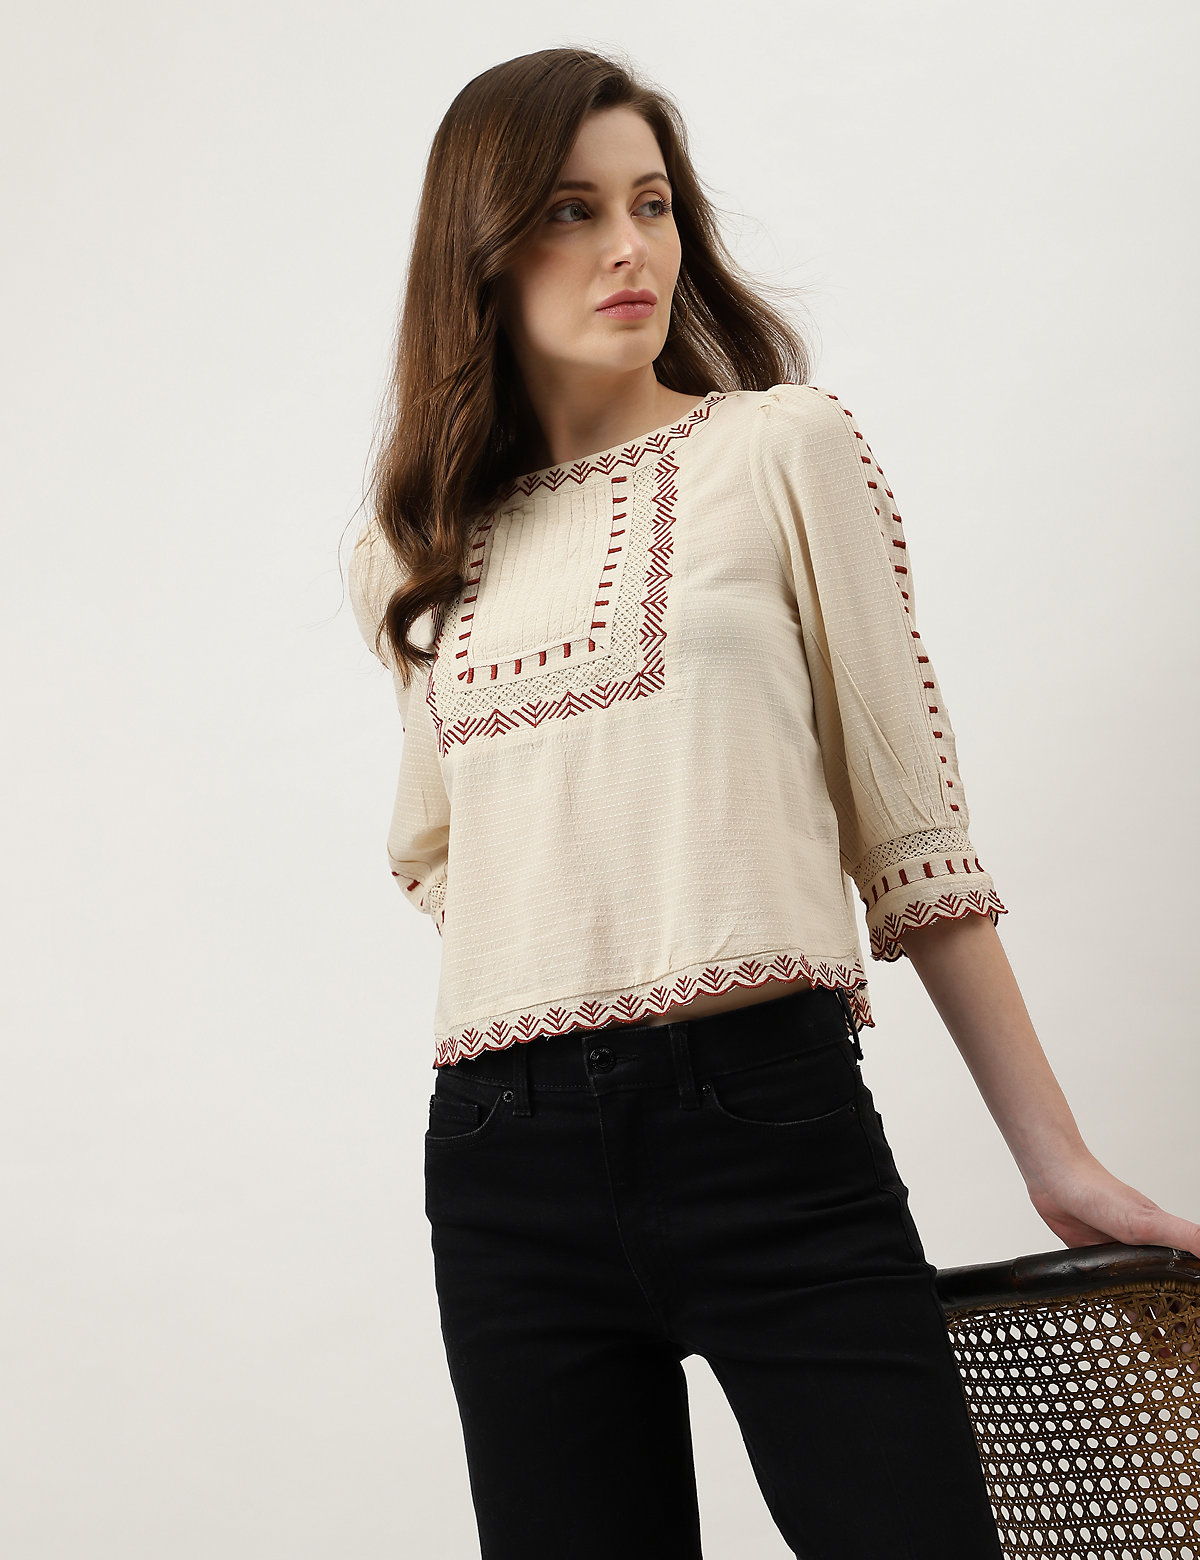 Embroidered Round Neck Top